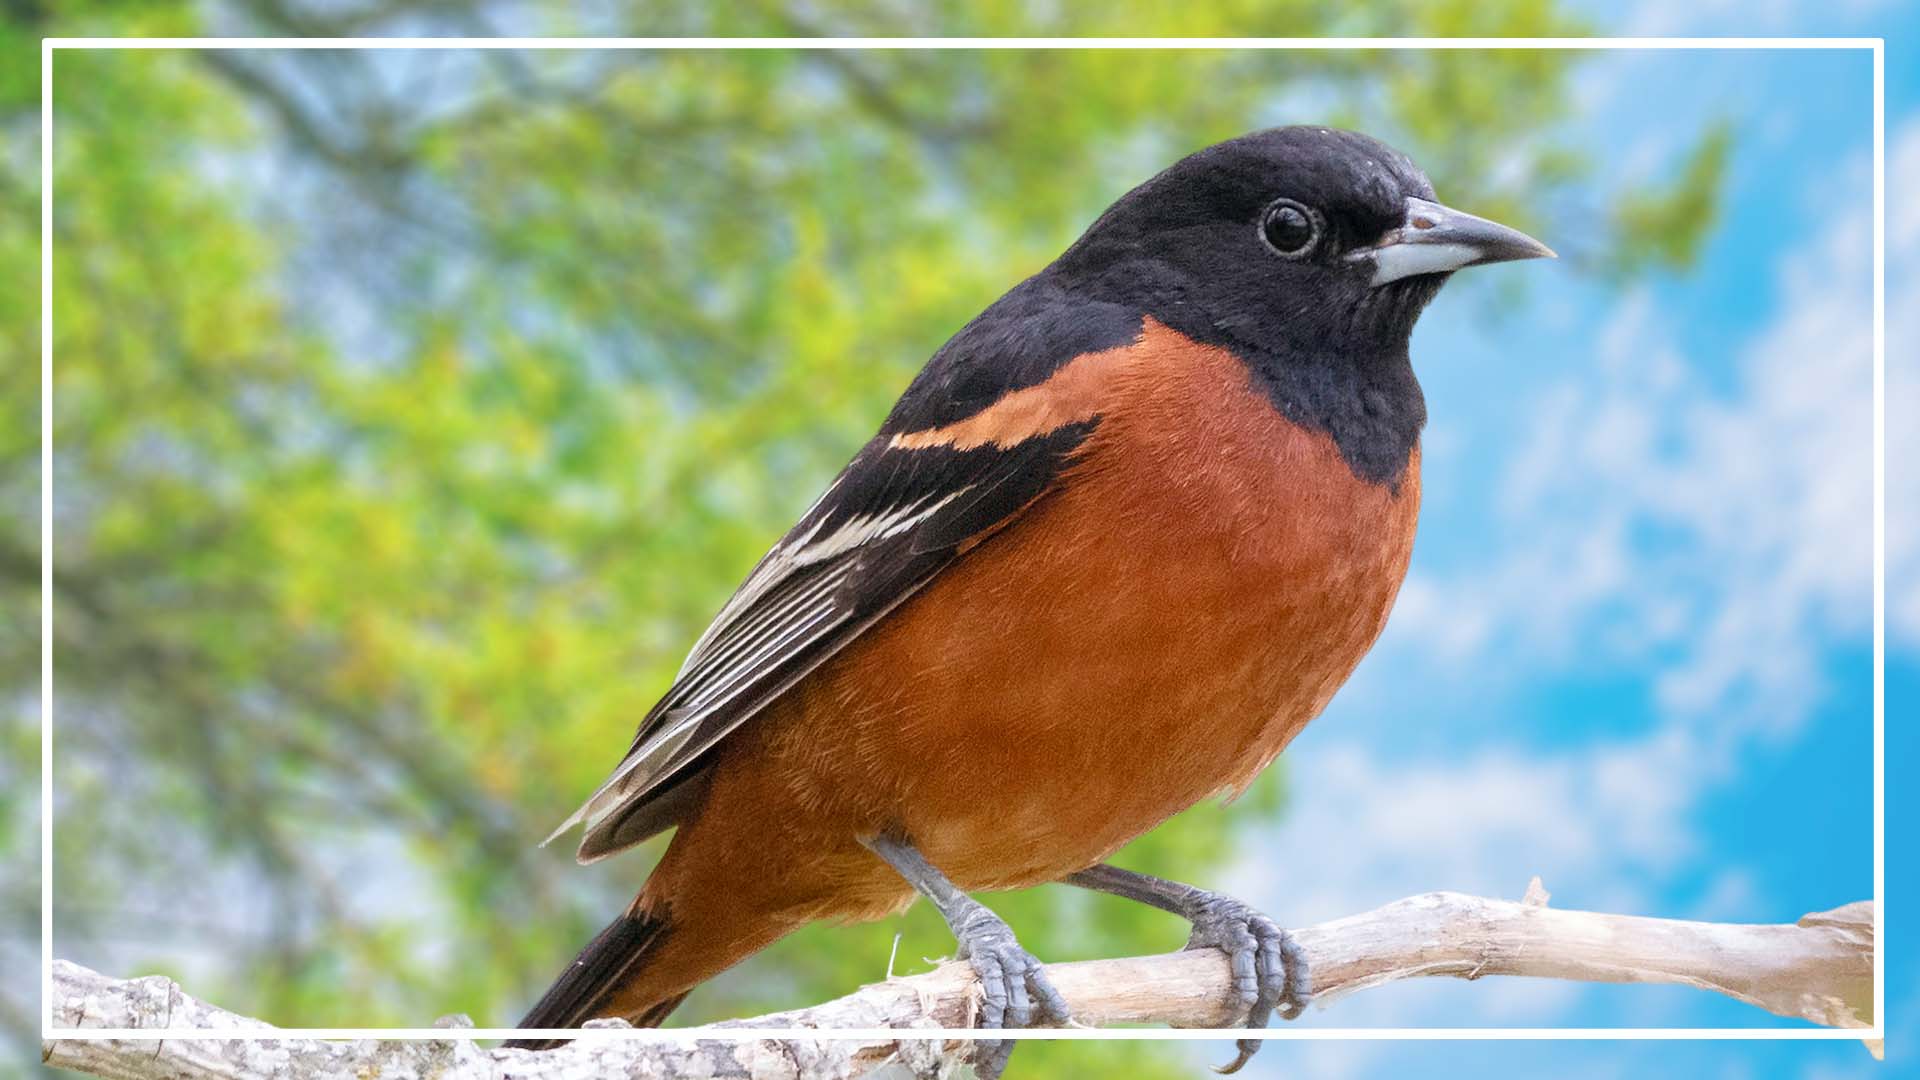 Orchard Oriole is a Brown birds with orange chests